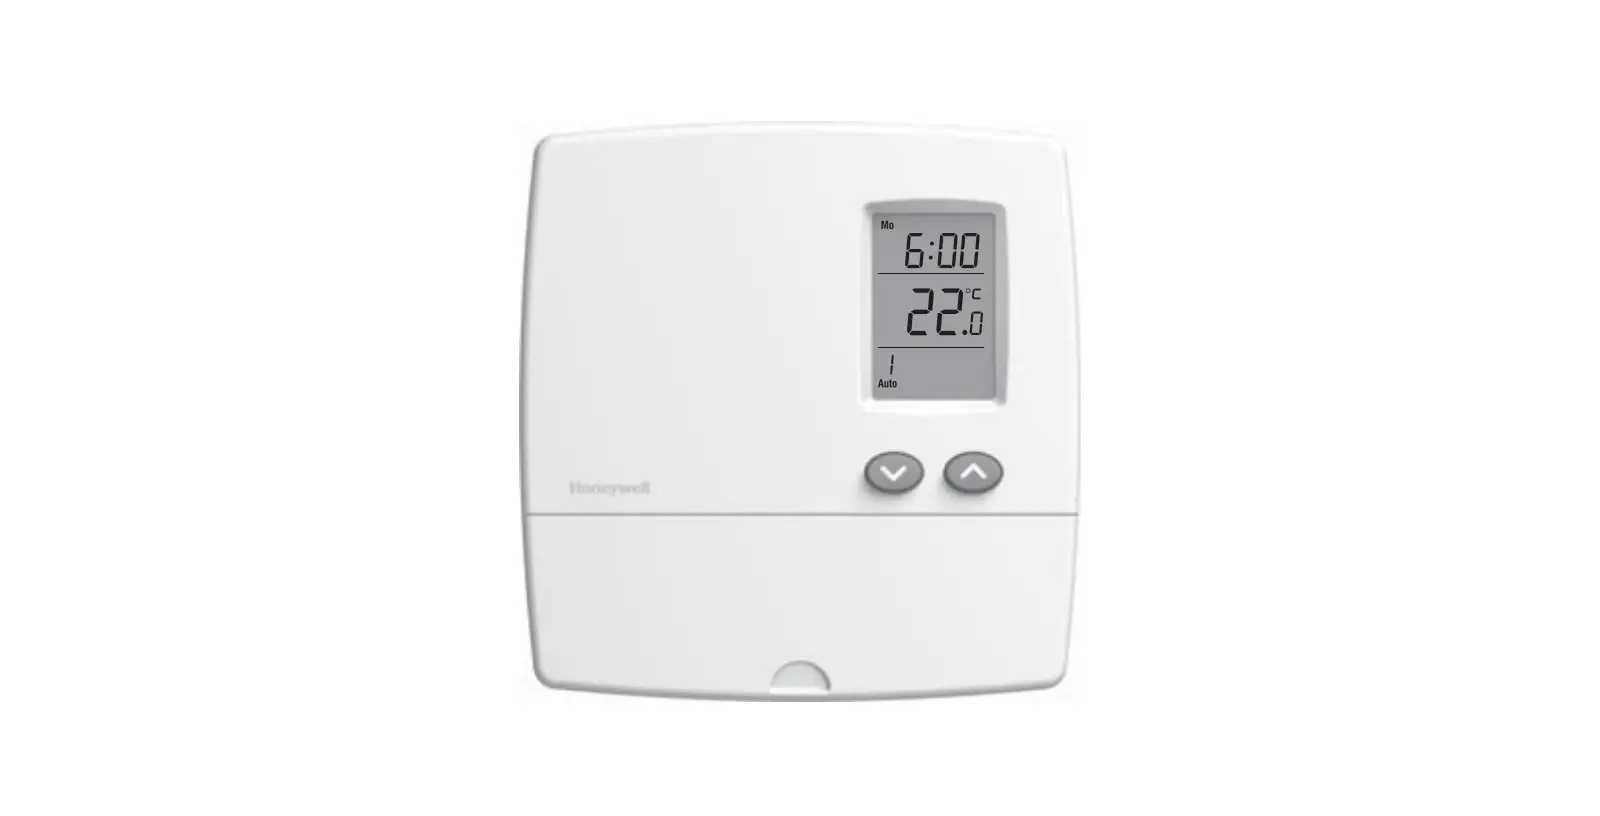 RLV4300 5-2 Programmable Thermostat